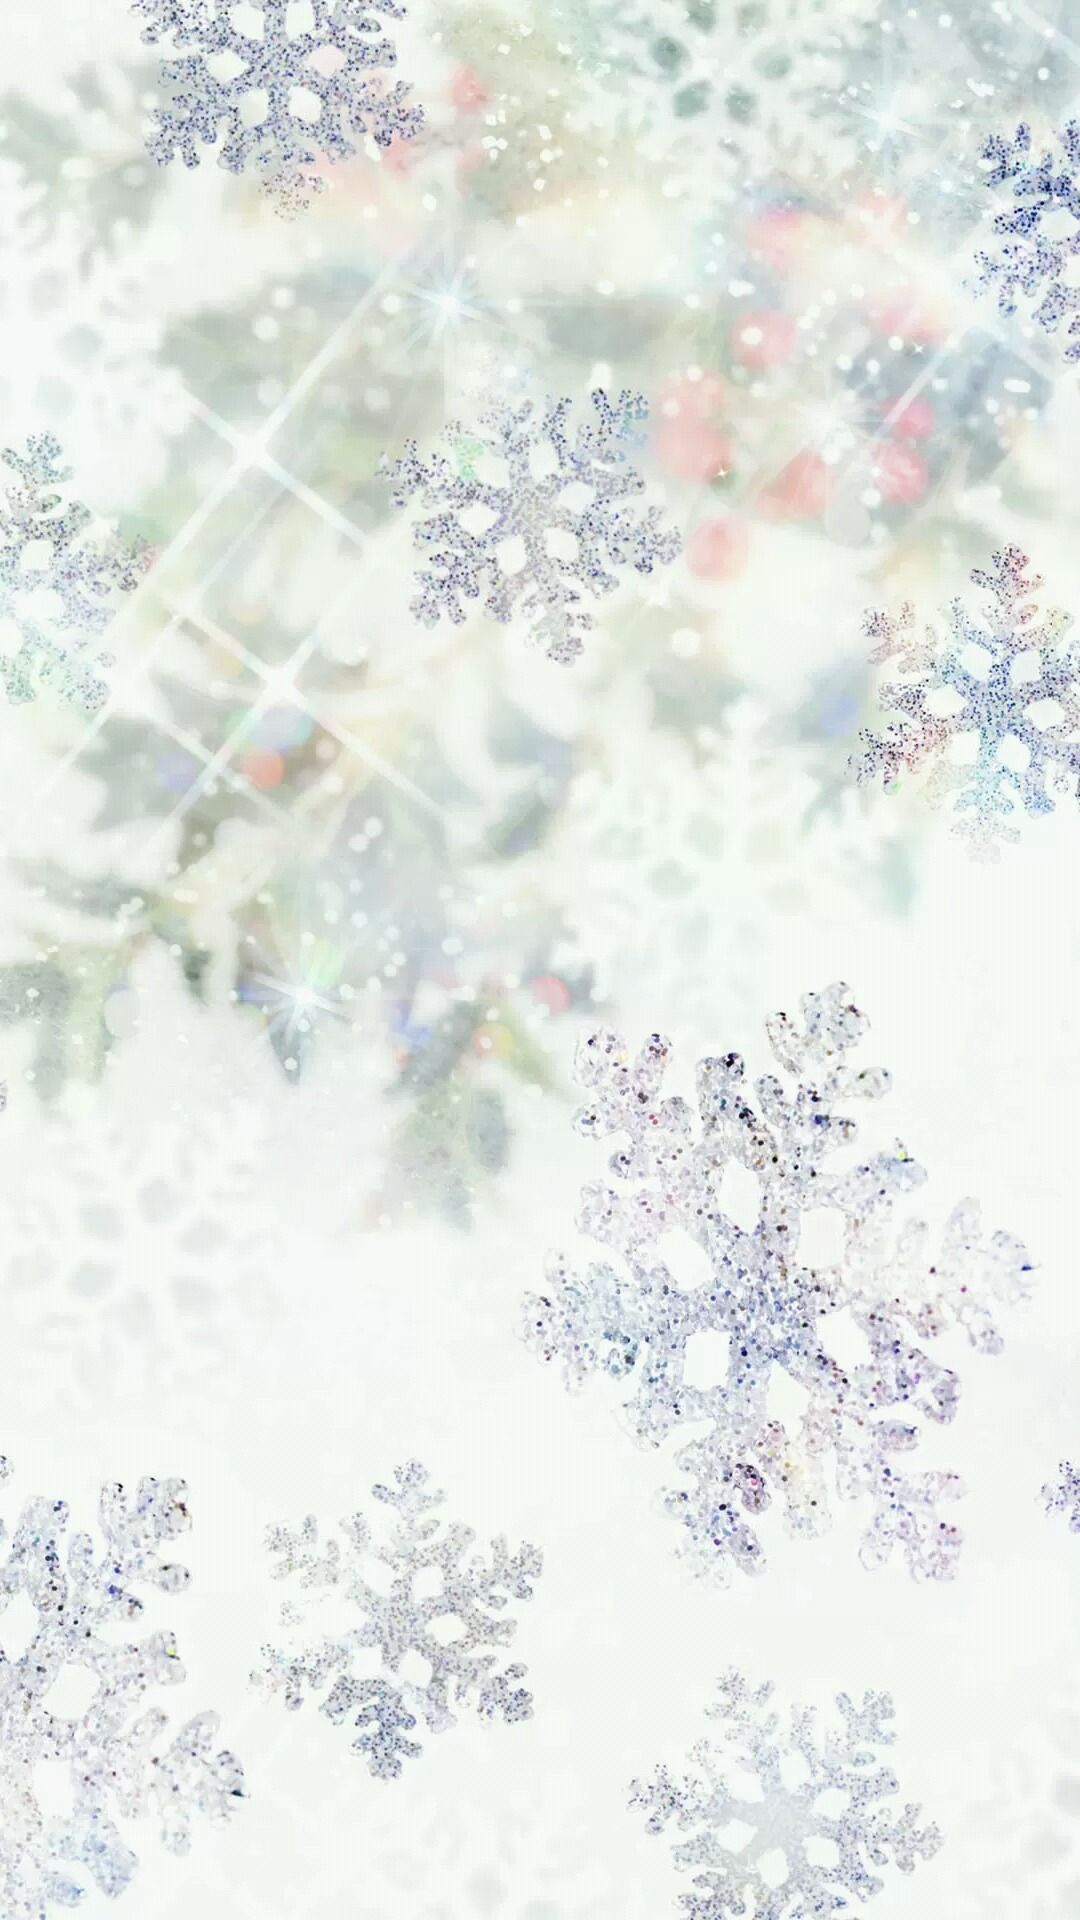 1080x1920 Sparkling snowflakes 1080 x 1920 Wallpapers available for free download. | Winter wallpaper, Iphone wallpaper winter, Sparkle wallpaper